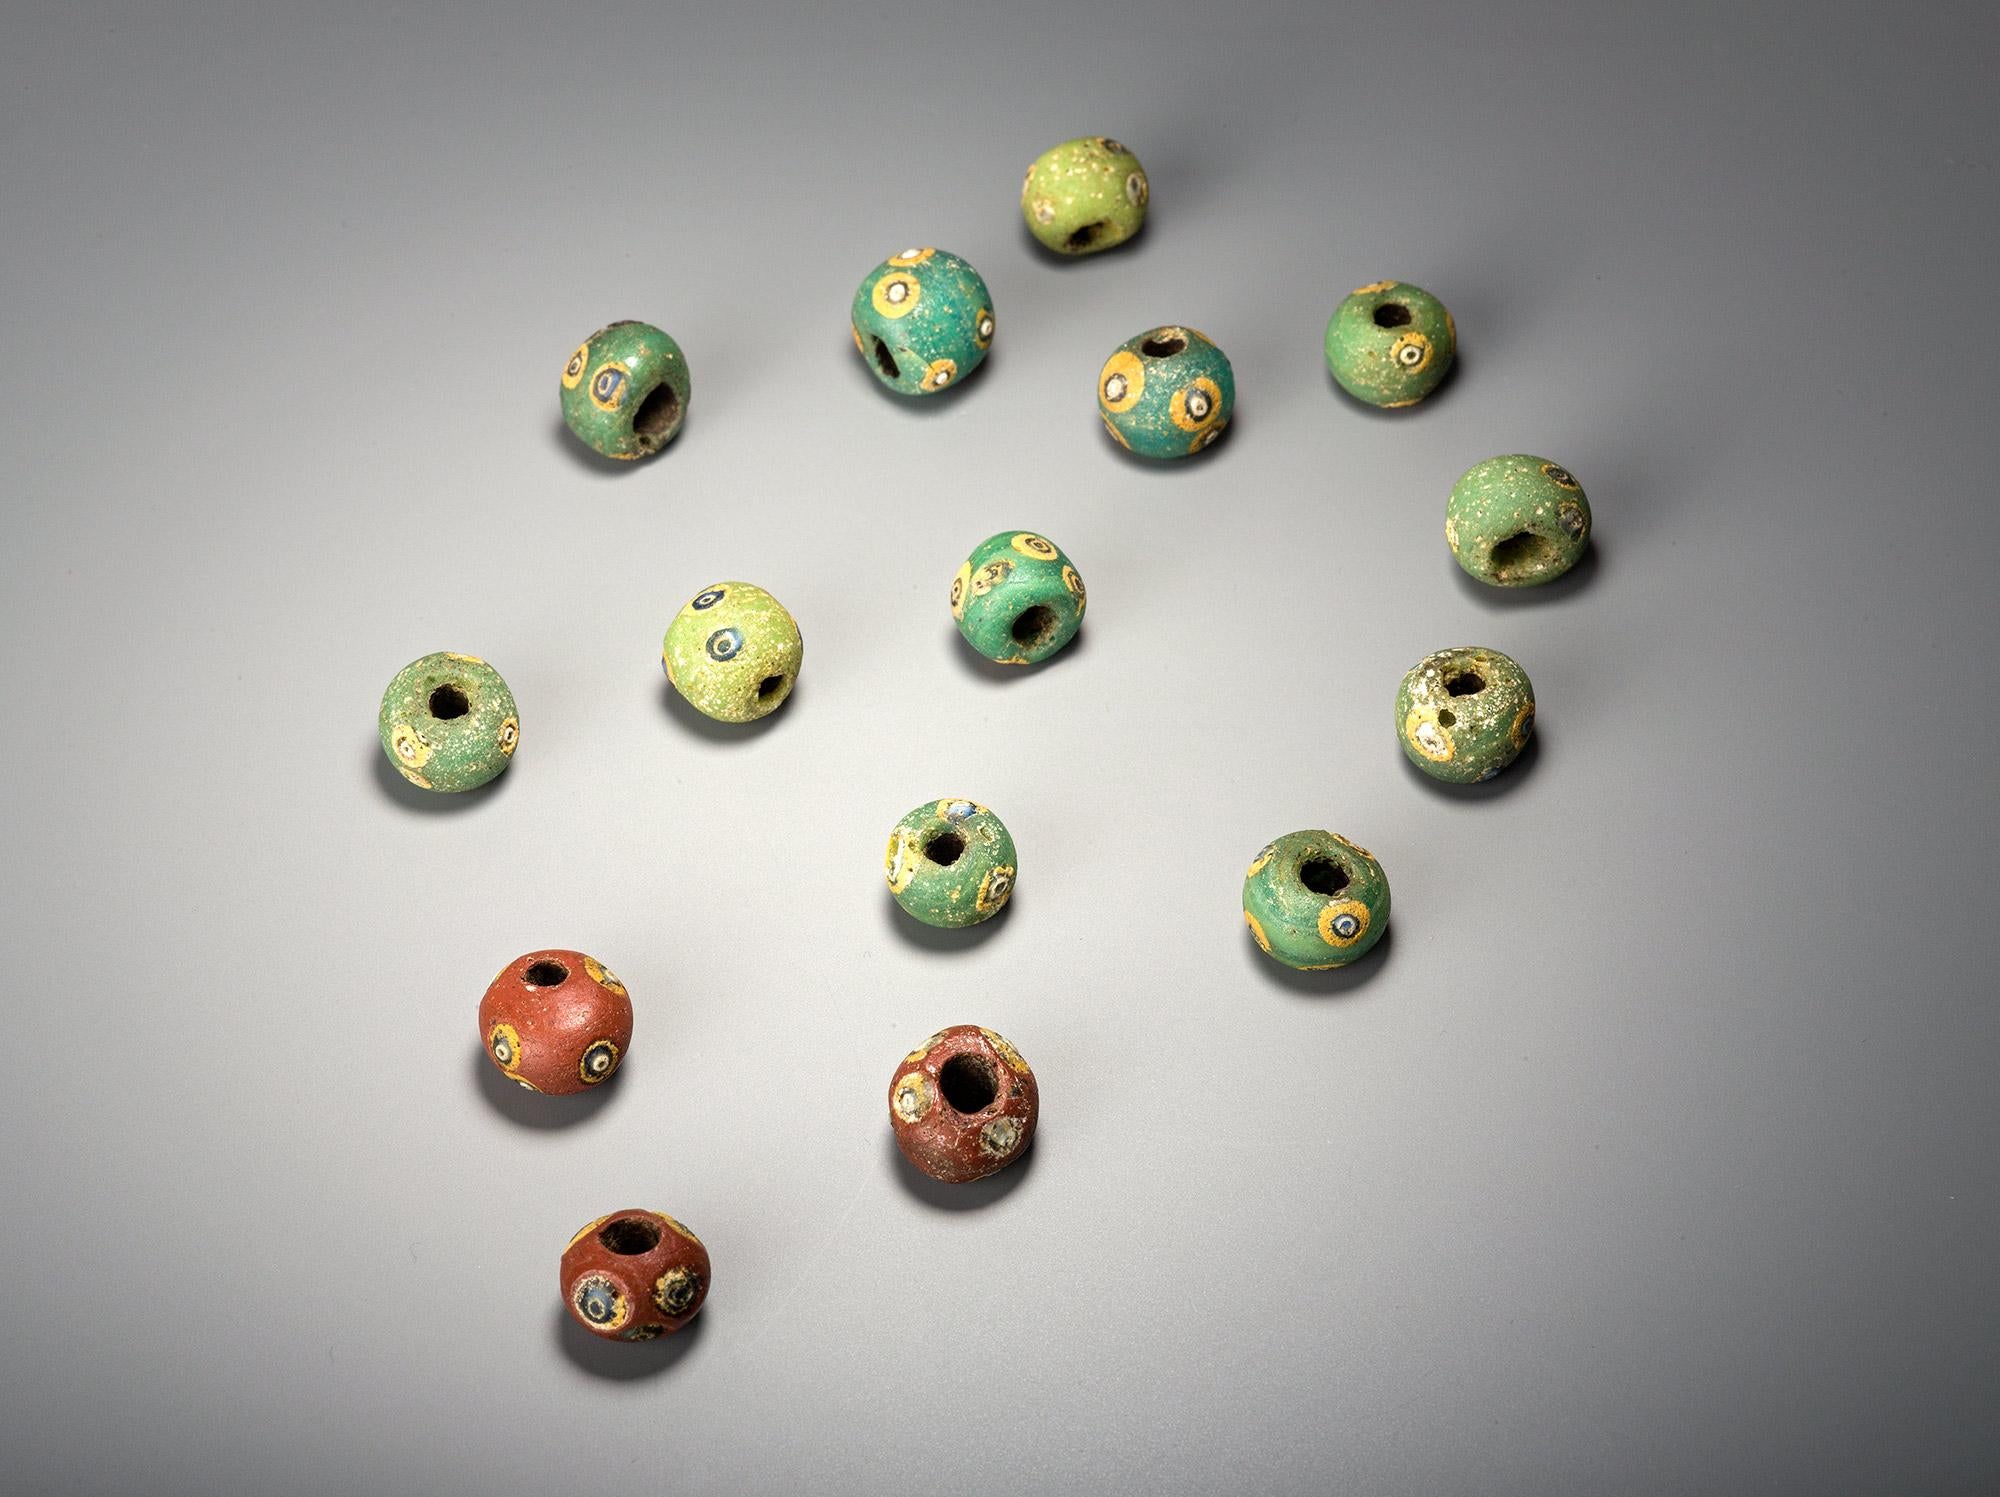 A fine set of 15 polychrome Phoenician glass eye beads.
The colours include red, green, yellow and blue.
One of the earliest examples of glassmaking, these ancient beads can be worn today by mounting on a necklace or a bracelet.
Accompanied by a